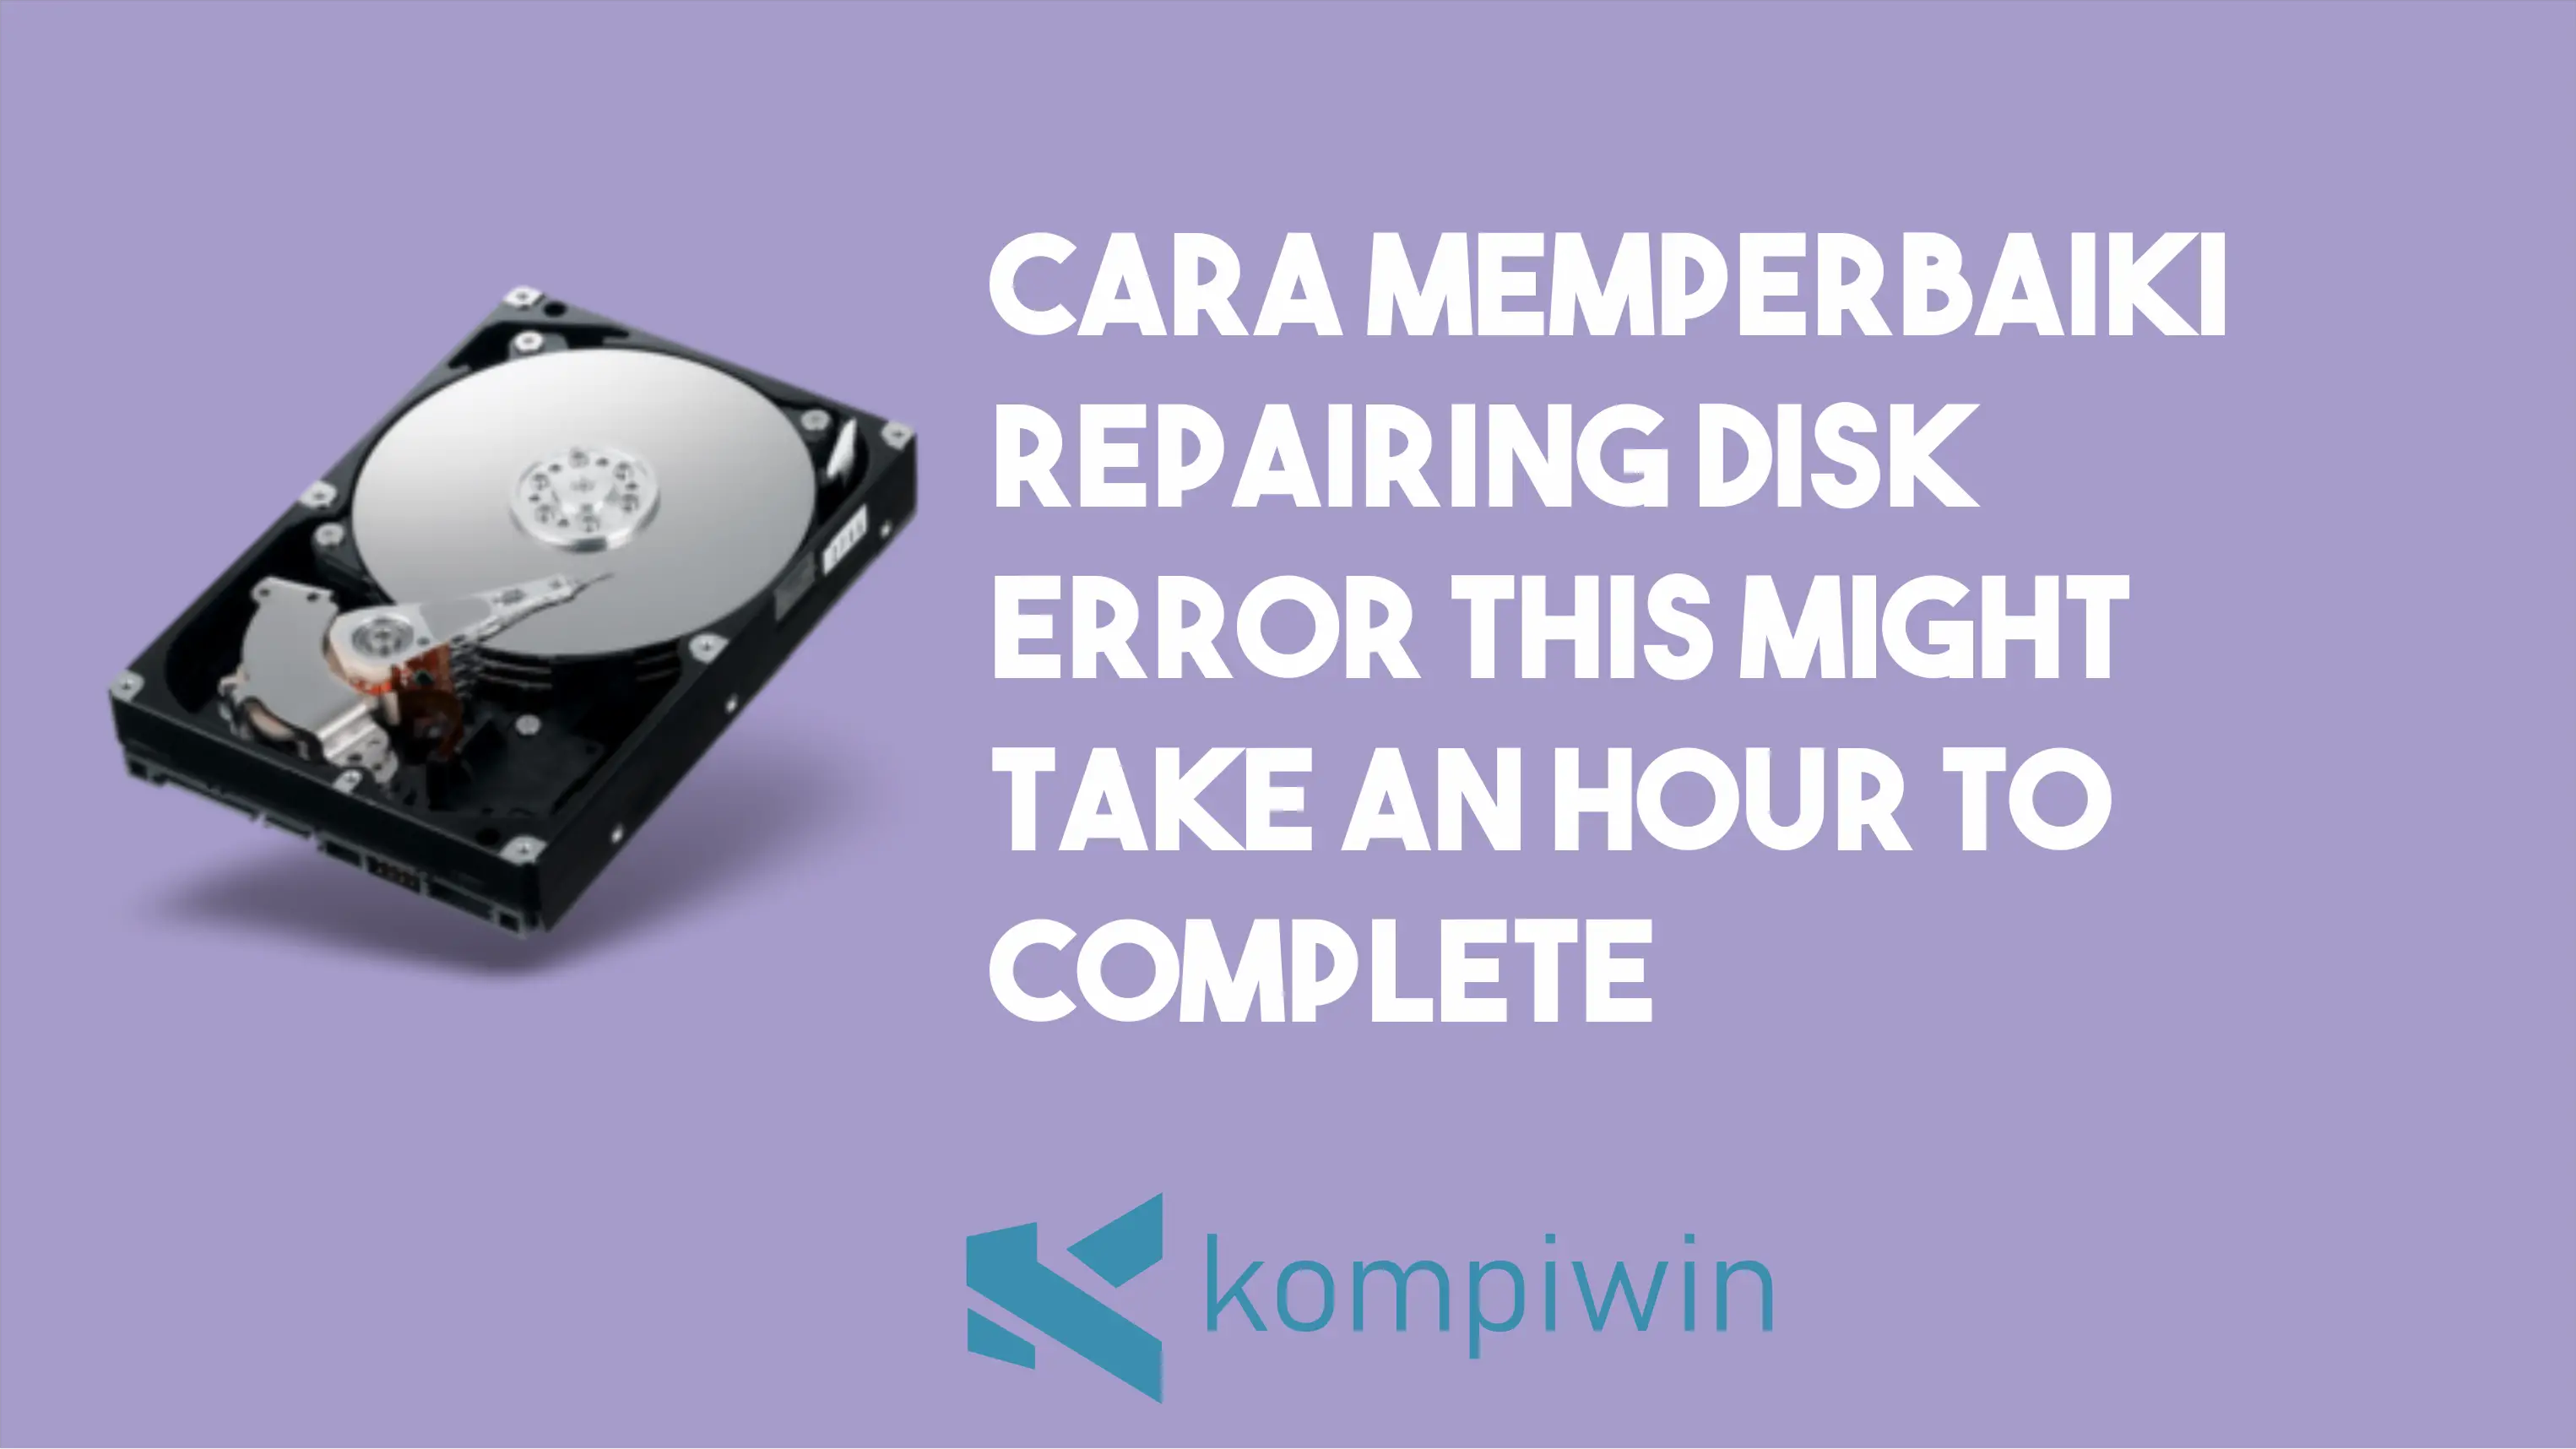 Cara Memperbaiki Repairing Disk Errors, This Might Take an Hour to Complete